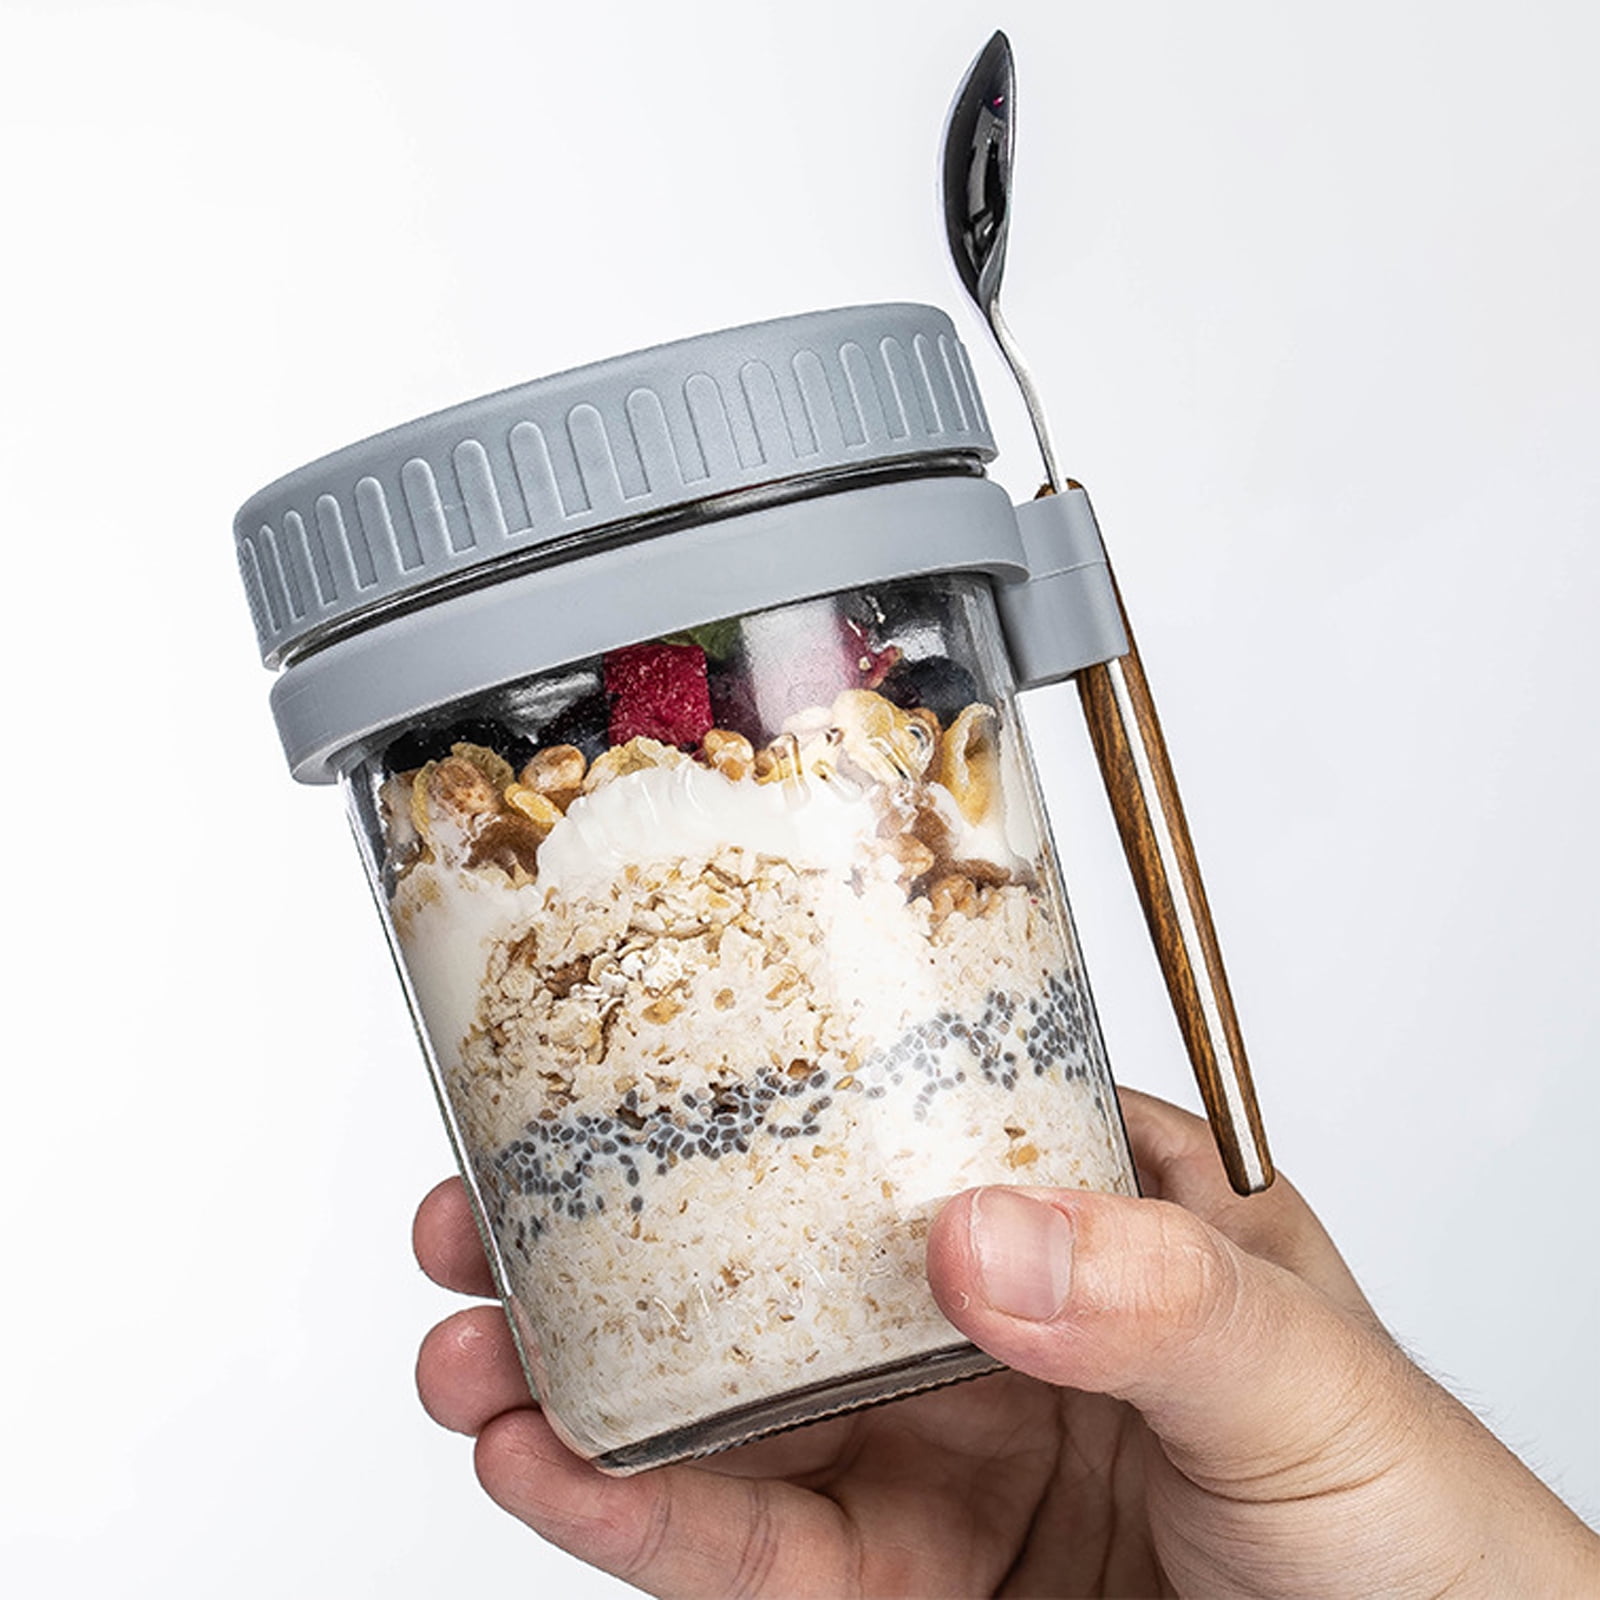 These $10 Overnight Oats Jars Can Go With You Anywhere – SheKnows